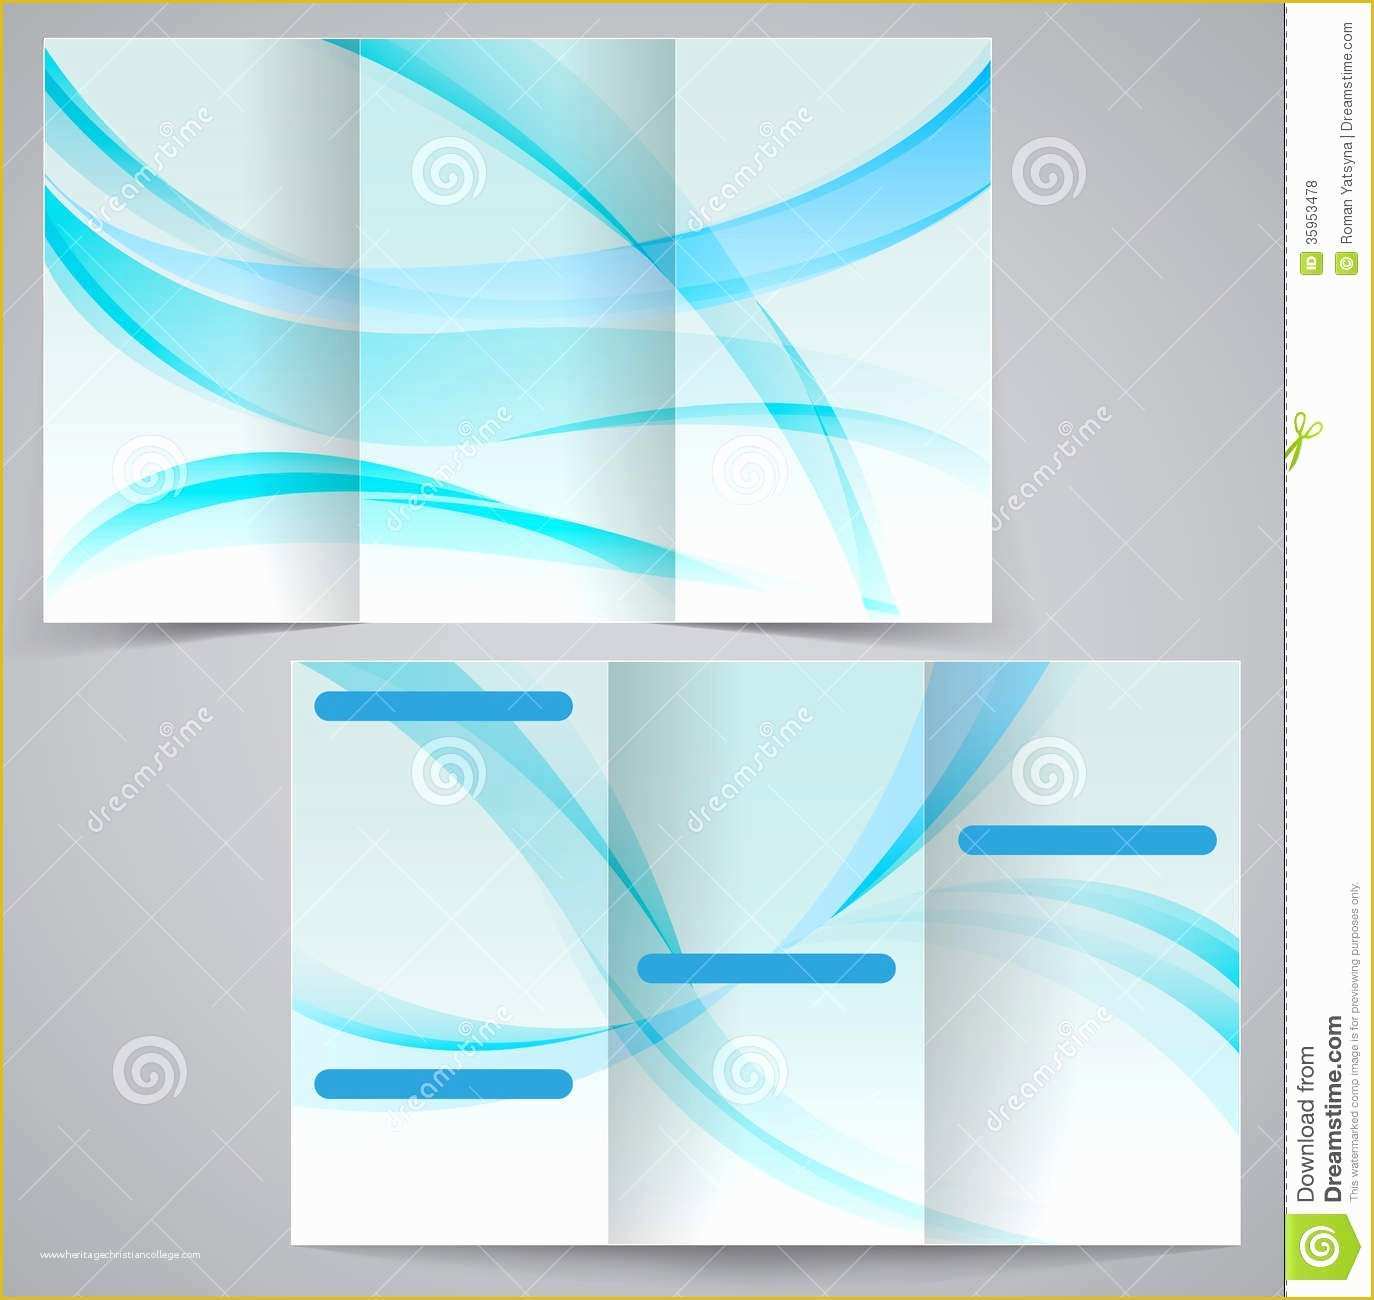 Free Tri Fold Brochure Design Templates Of Blank Brochure Template Word Example Mughals